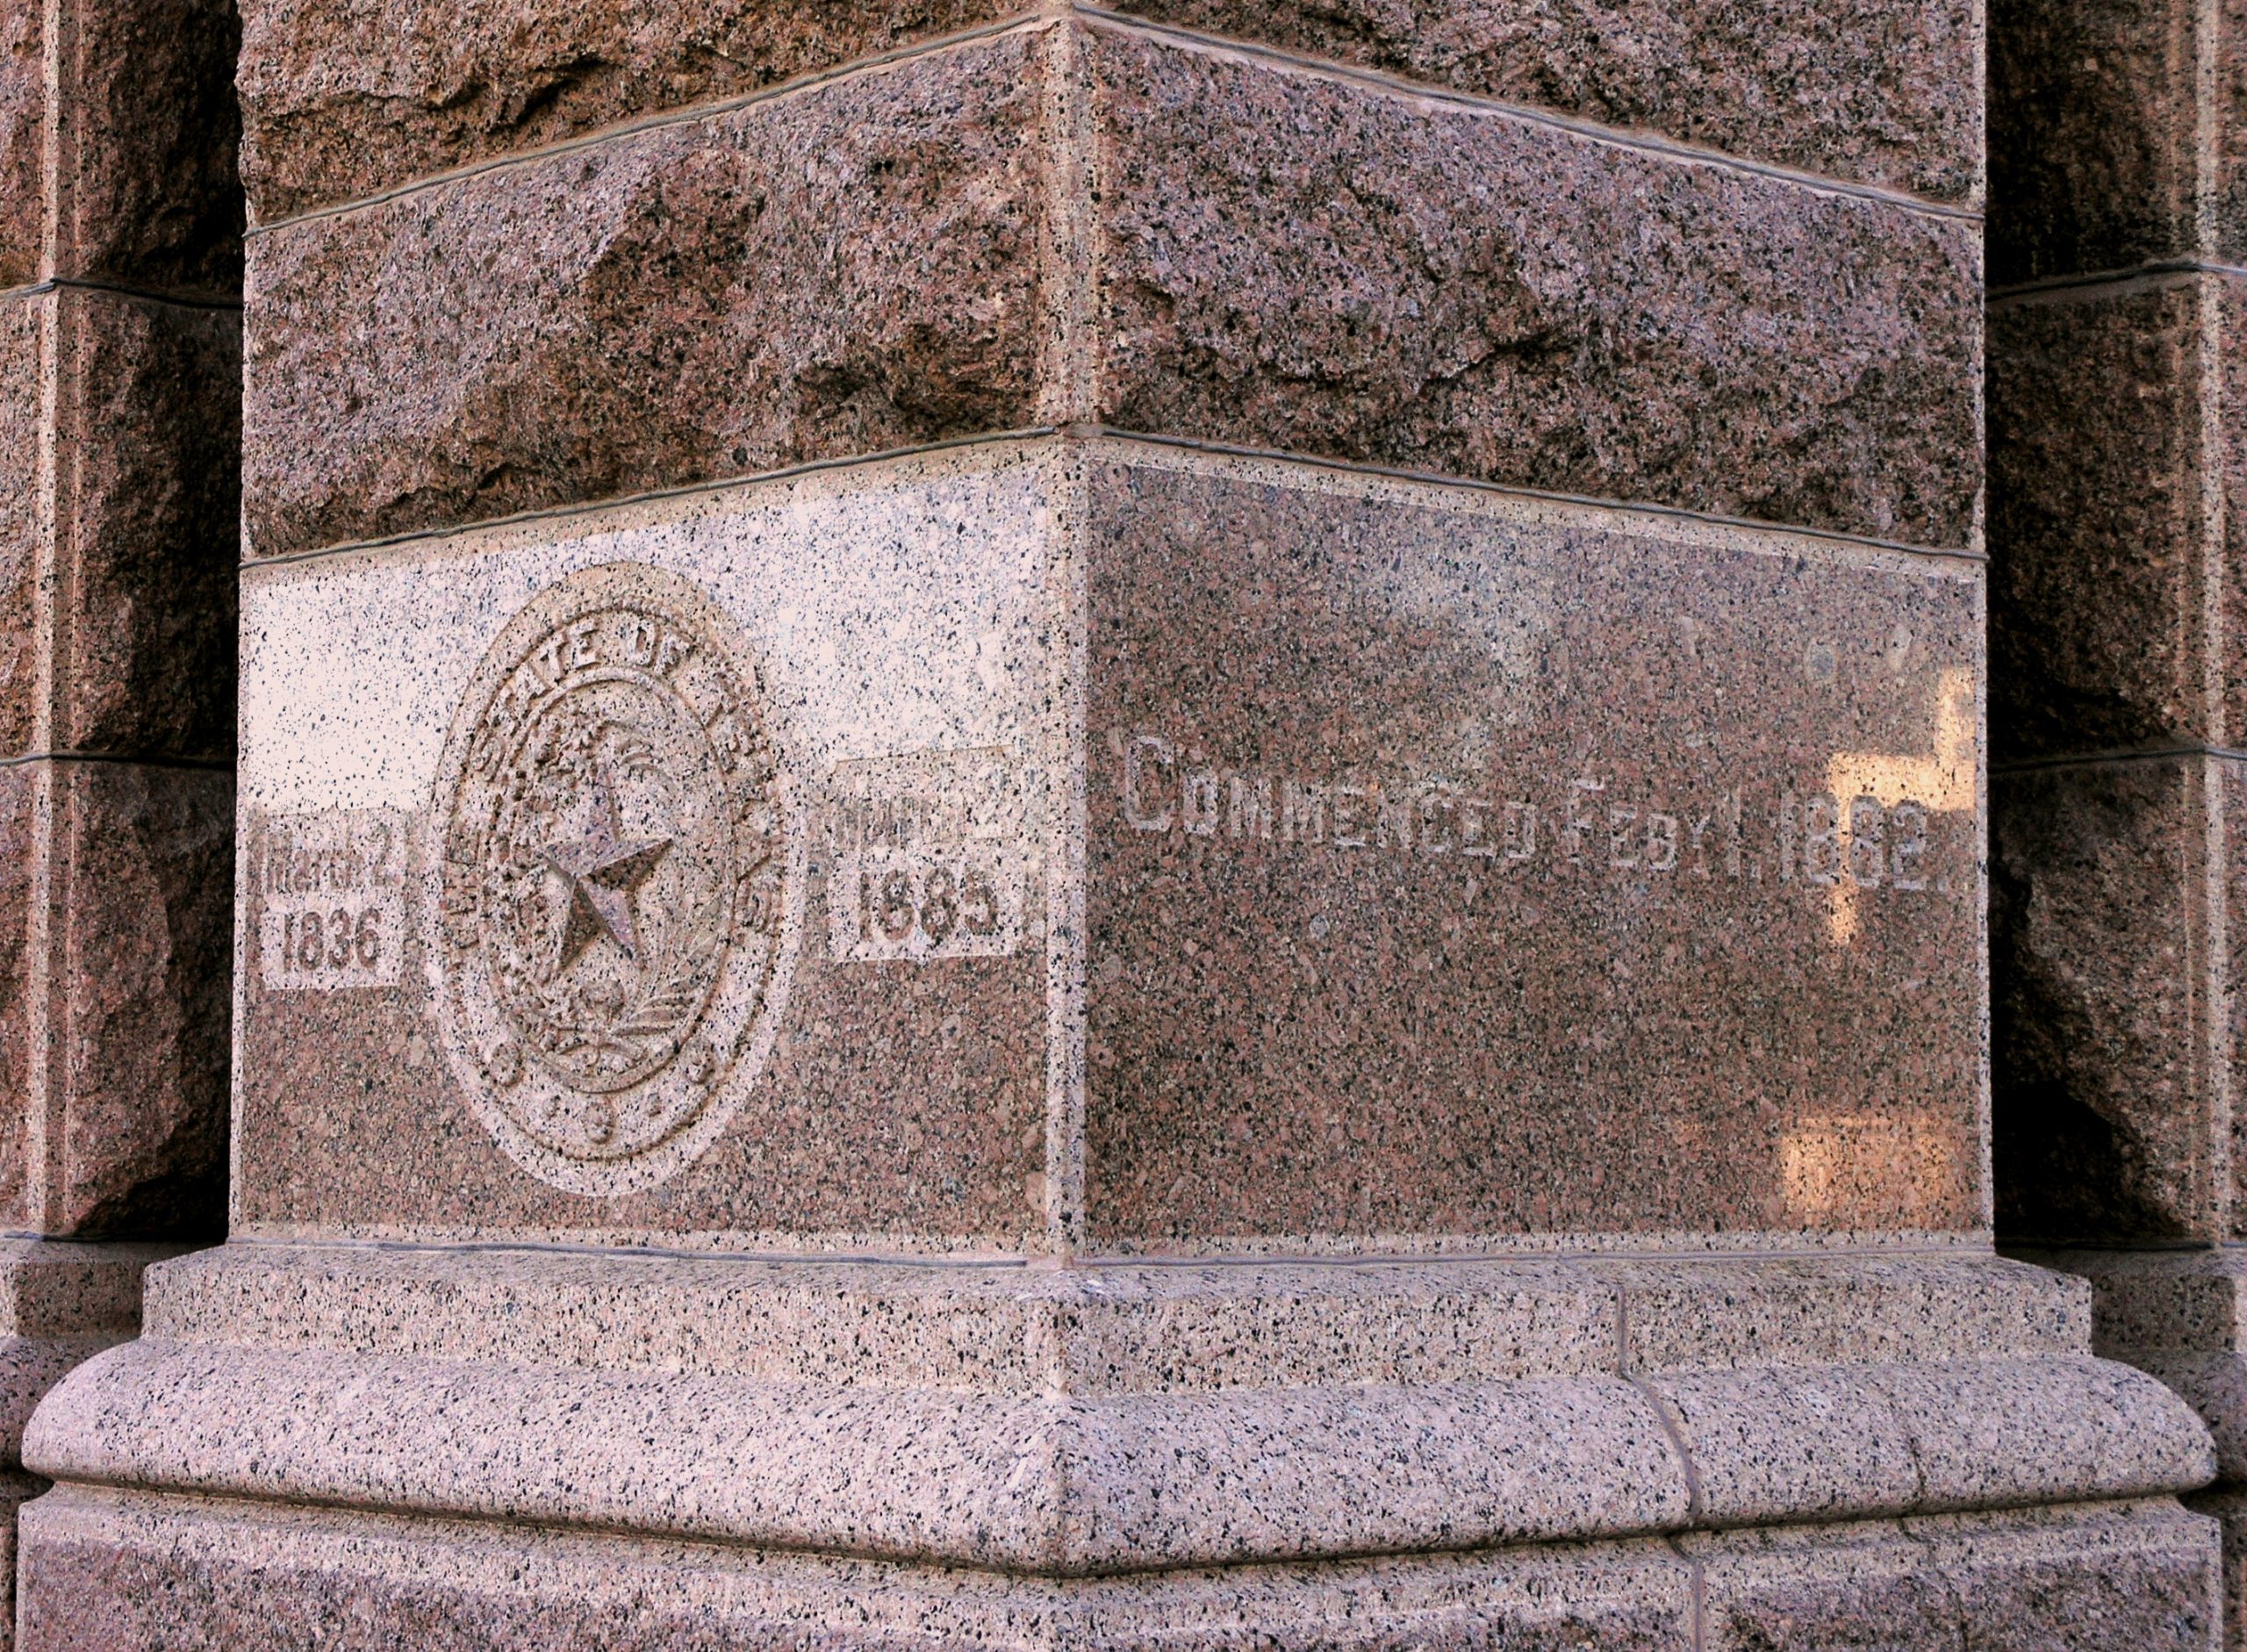 A smooth red granite block at the base of a column with the seal of the state of Texas engraved into it, and the years 1836 and 1885.